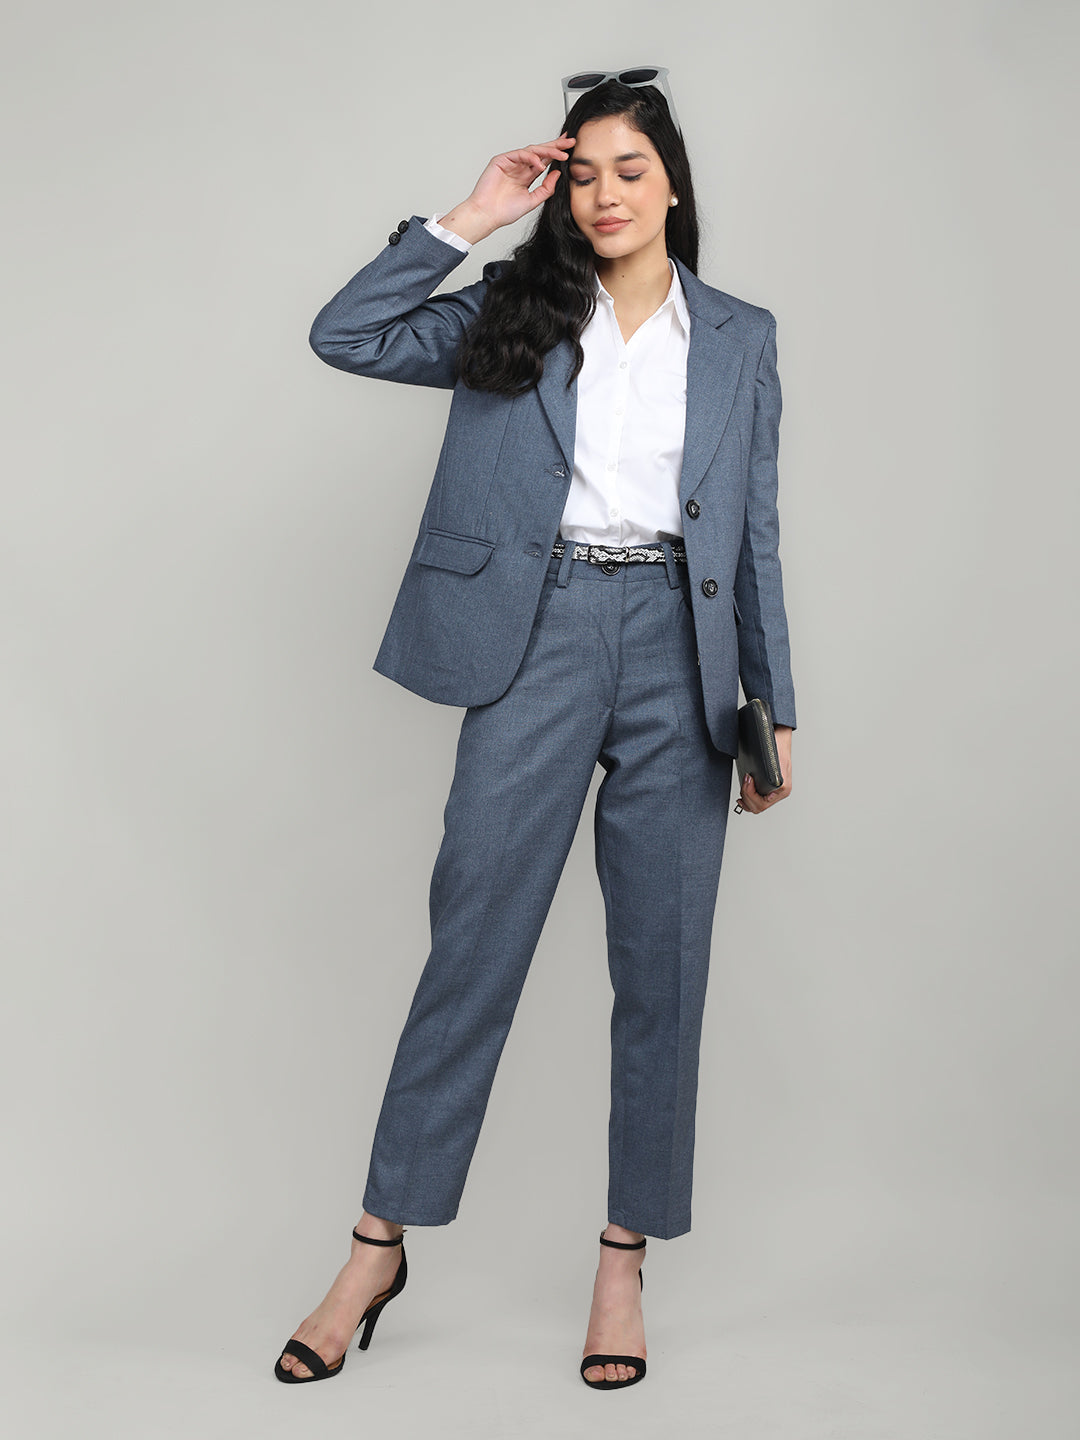 Formal Suits For Women